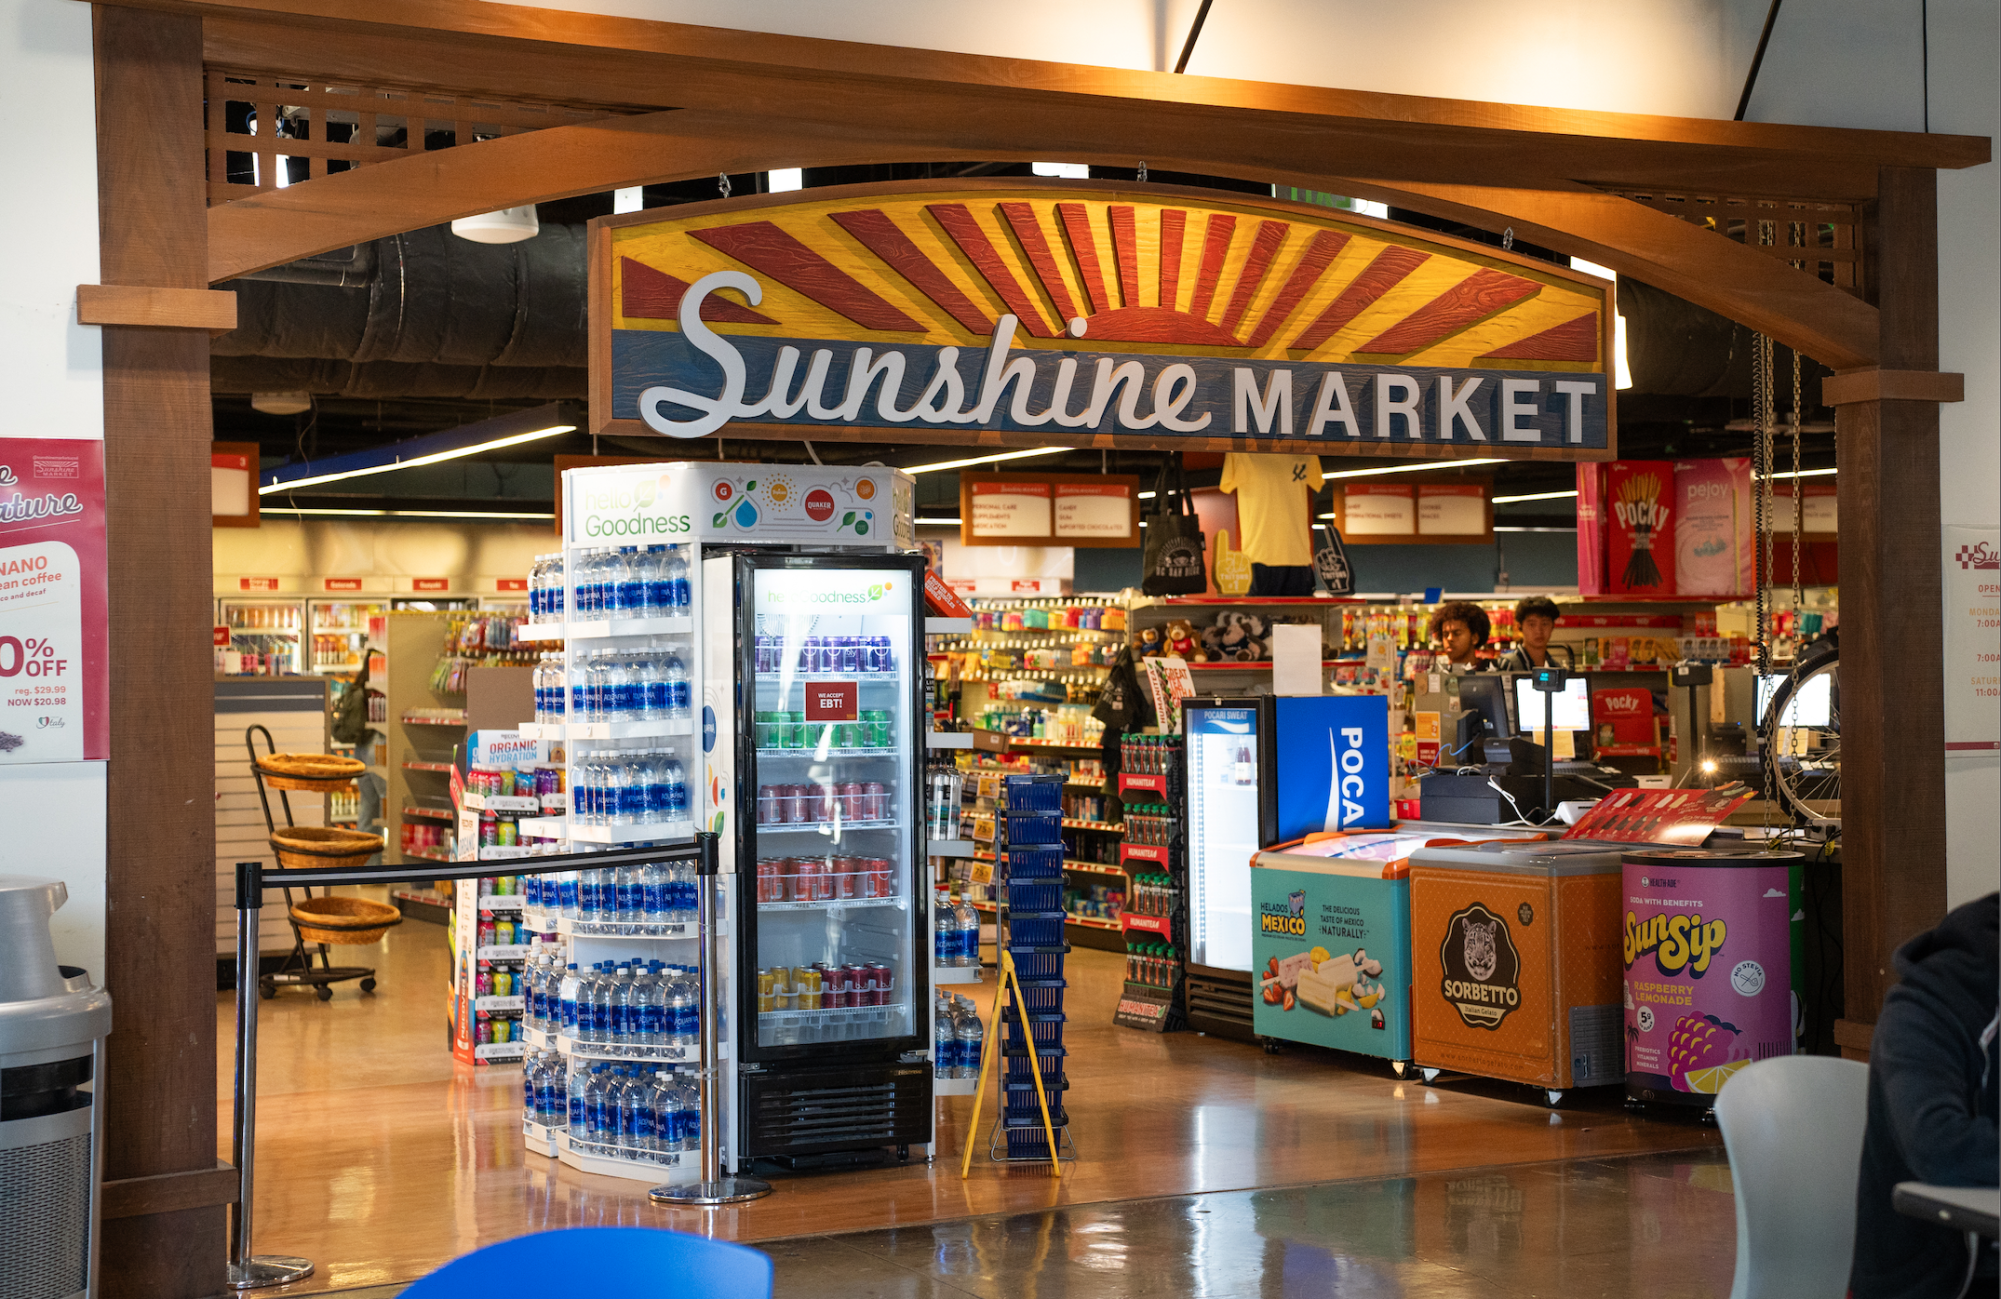 HDH derails the businesses they onboard, and Sunshine Market is its next victim